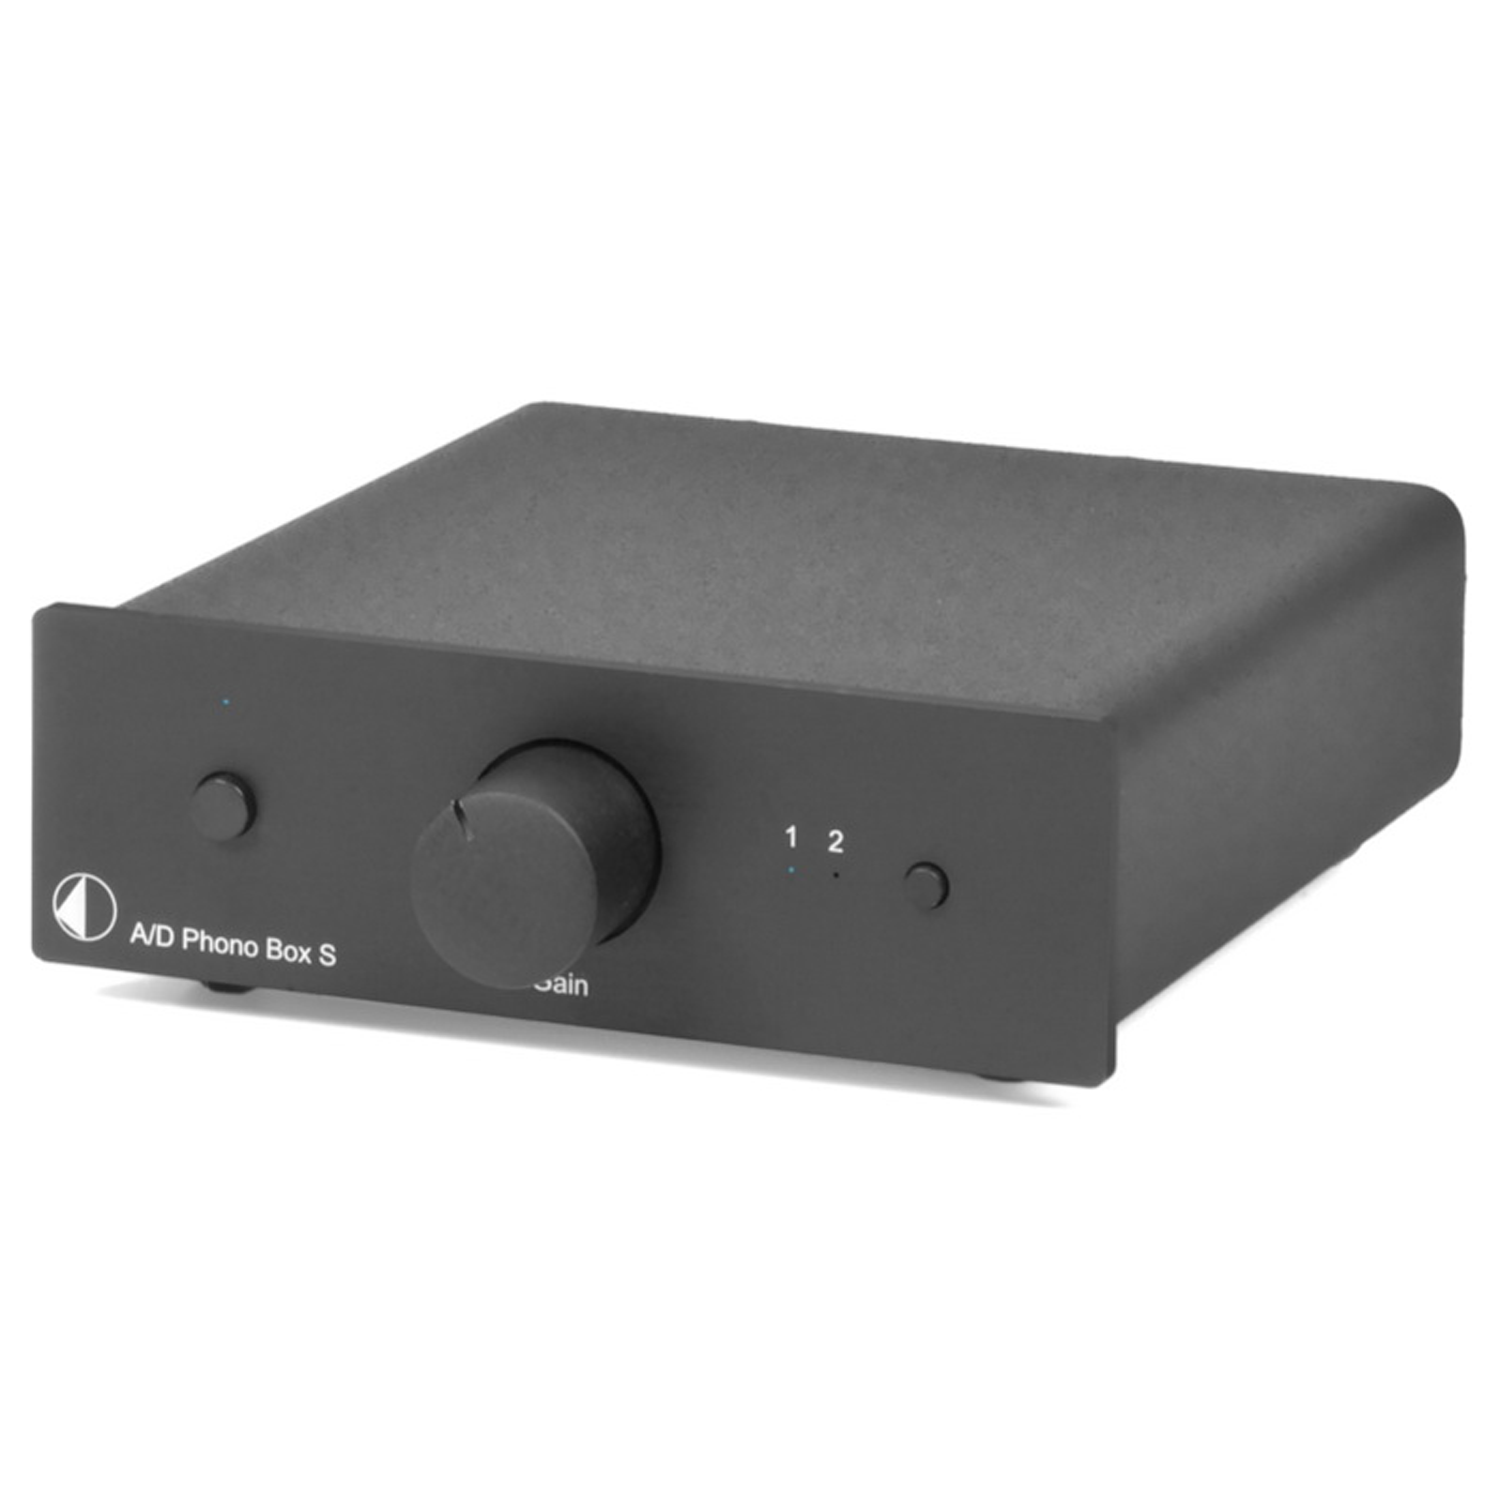 PRO-JECT NEW A/D Phono Box S Analog to Digital Phono Preamp Black